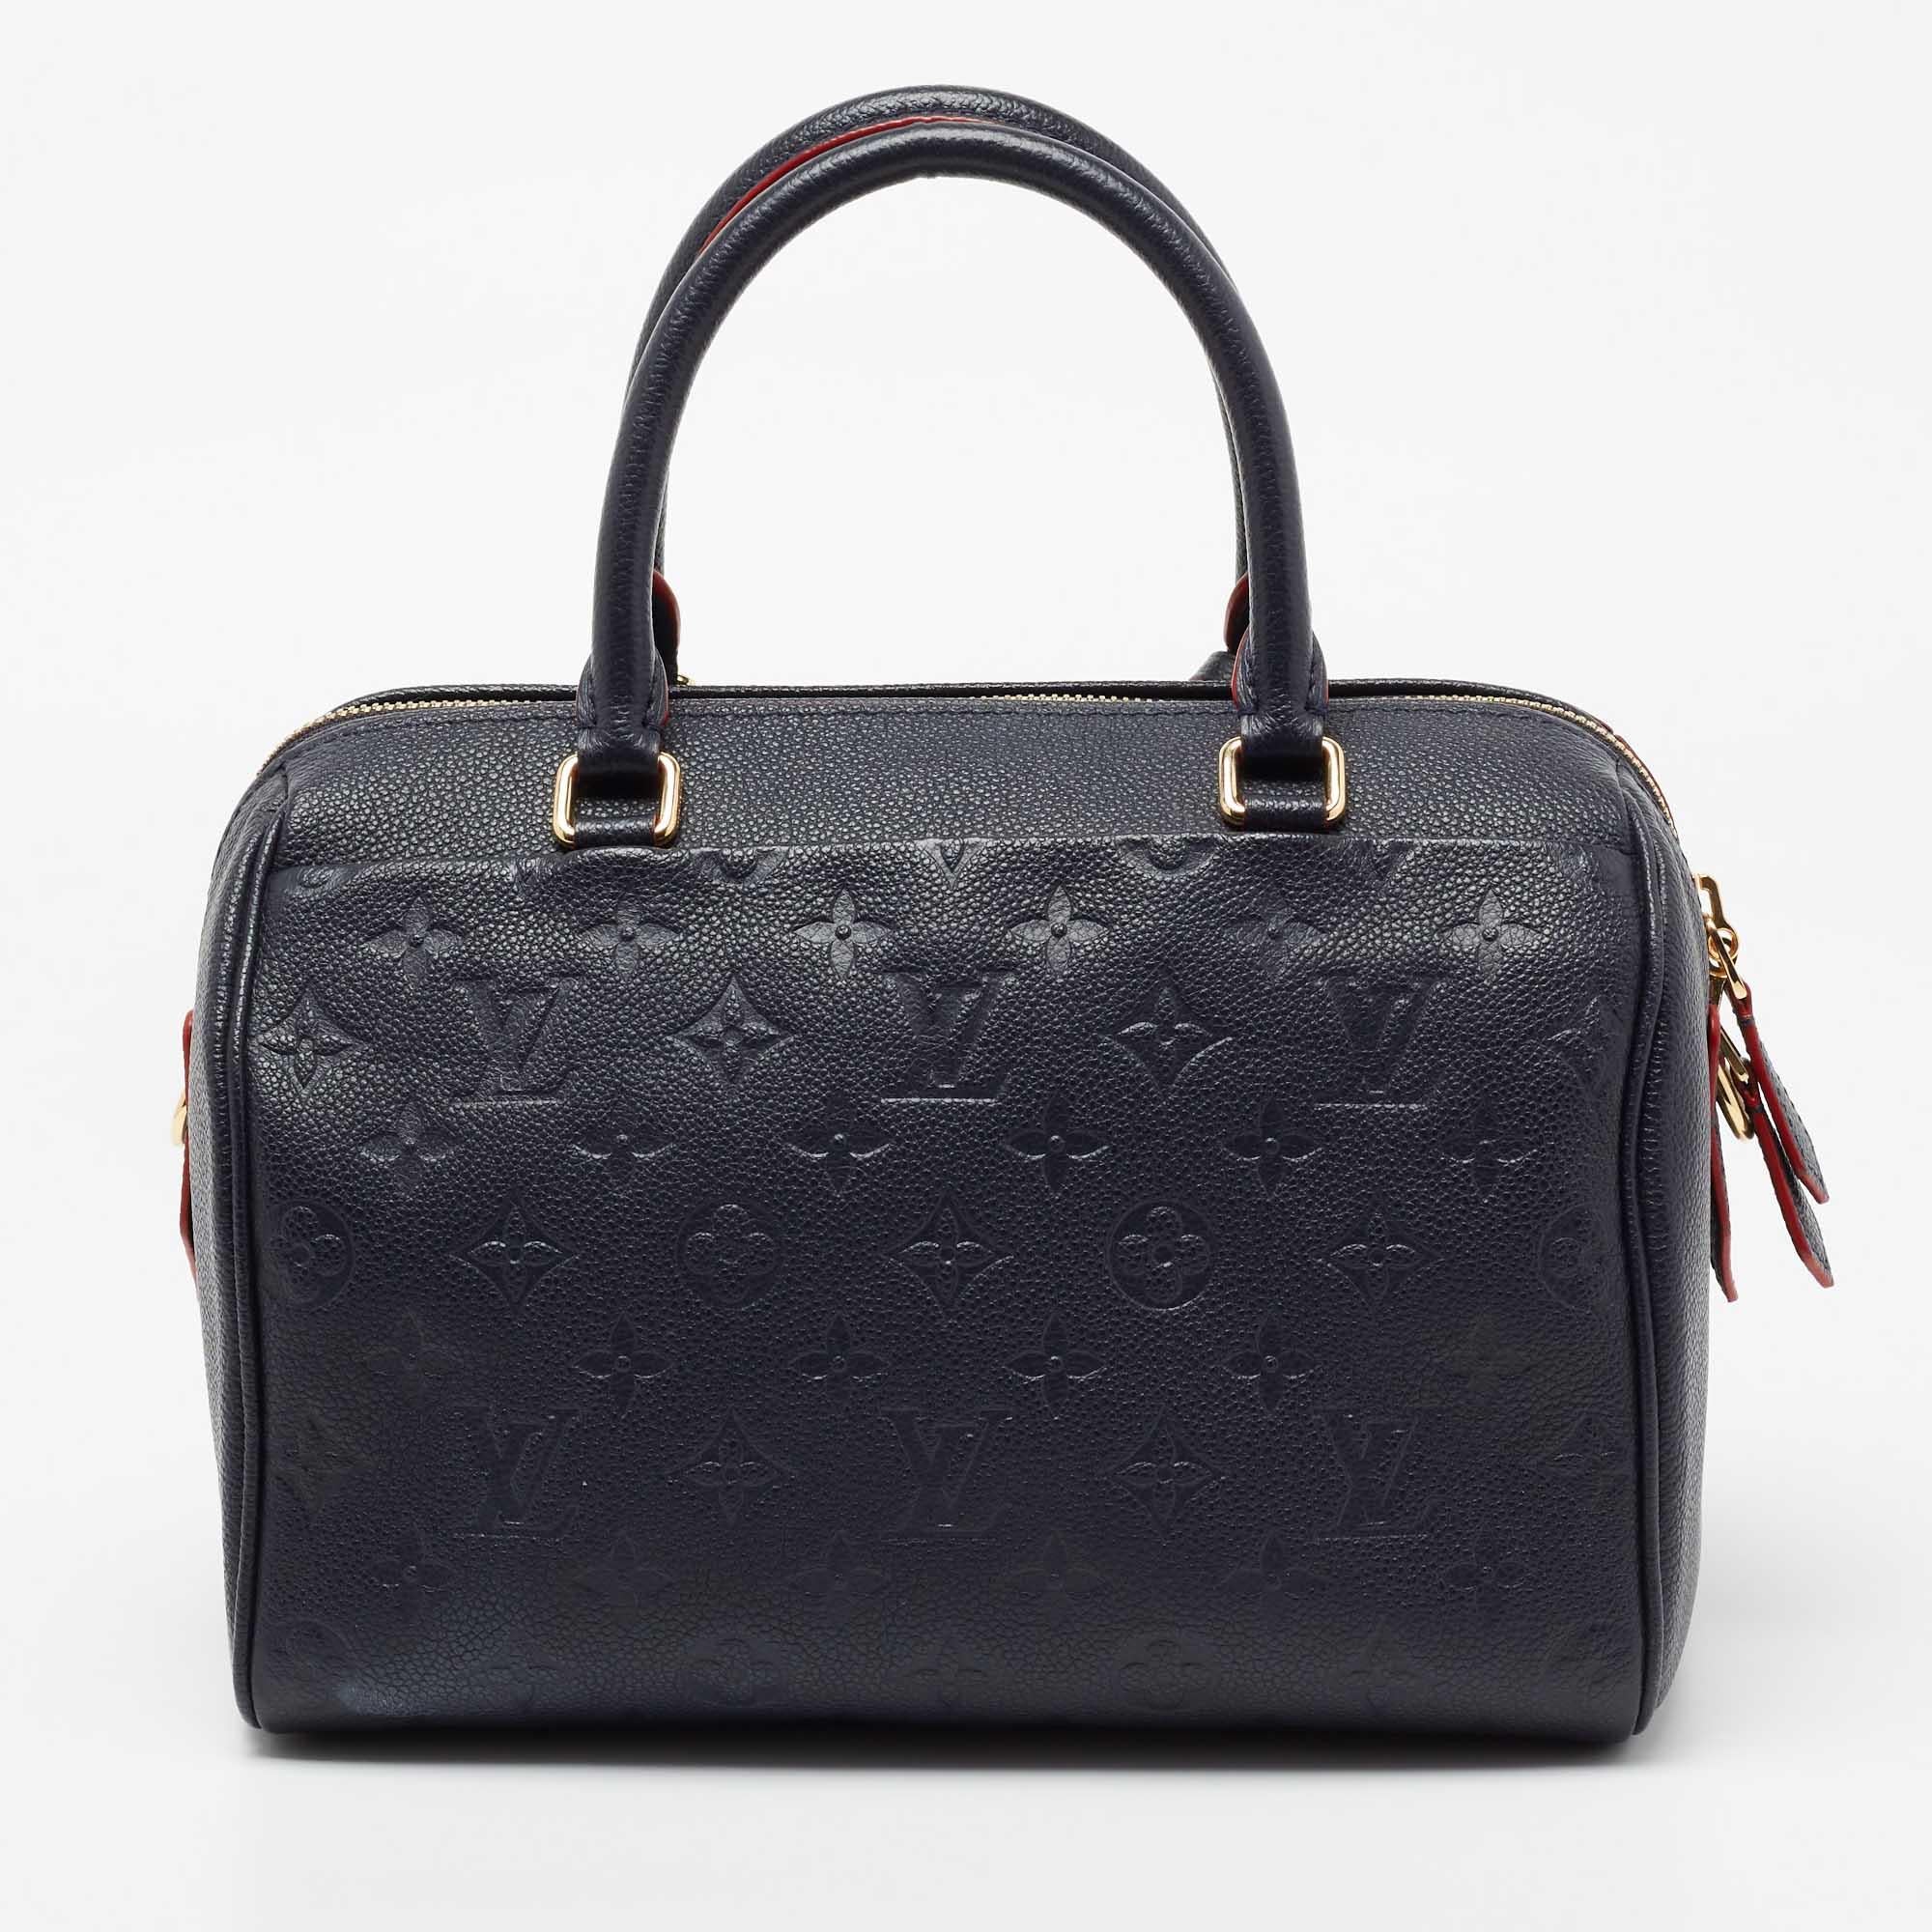 Fashion lovers naturally like to travel in style, and at such times only the best handbag will do. That's why it is wise to opt for this Louis Vuitton Speedy Bandouliere as it is well-crafted from special leather. It flaunts gold-tone hardware and a